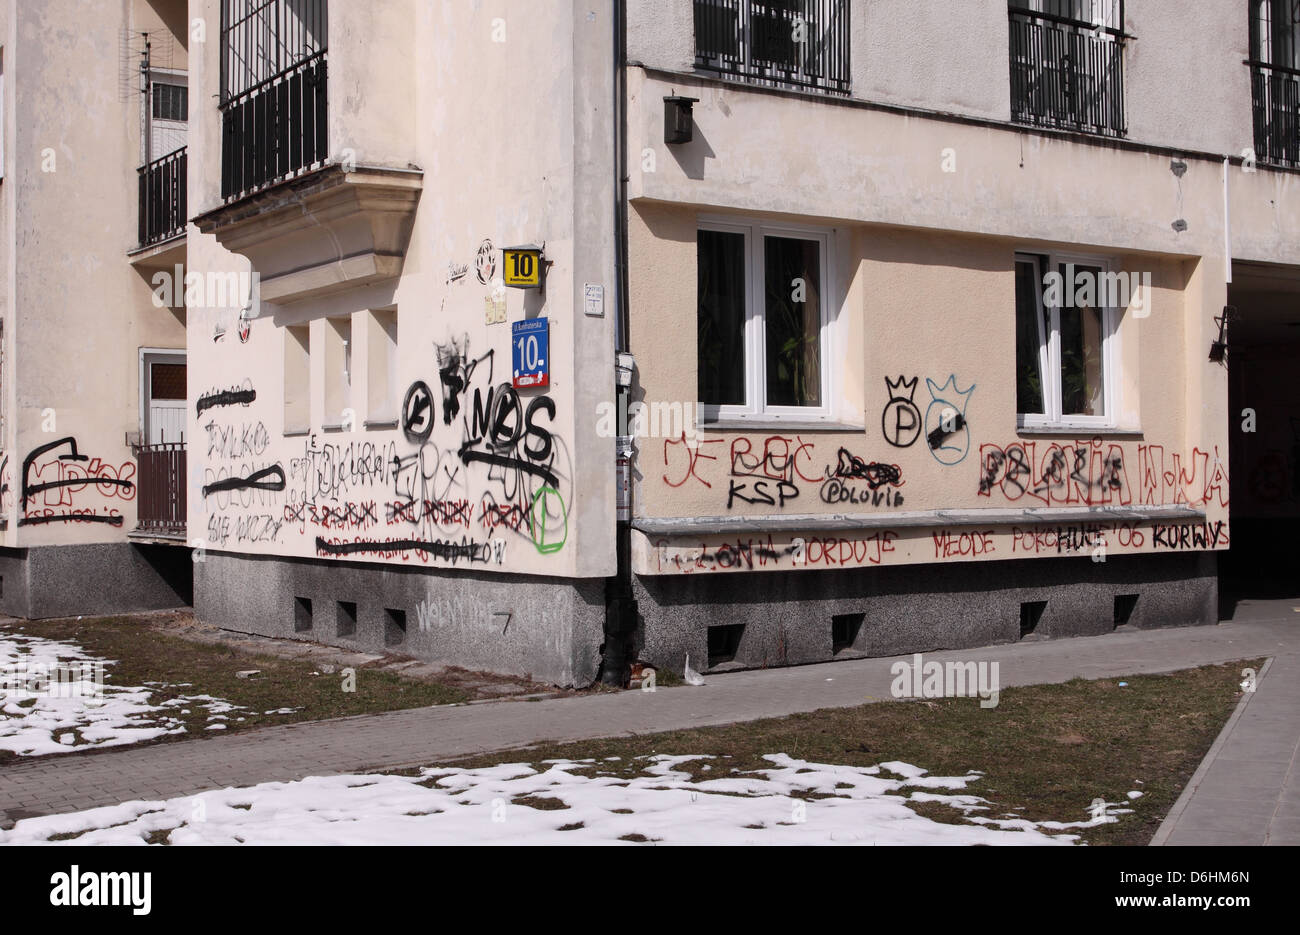 Warsaw Poland football graffiti relating to the rivalry between Polonia and Legia Warszawa on a block of flats Stock Photo